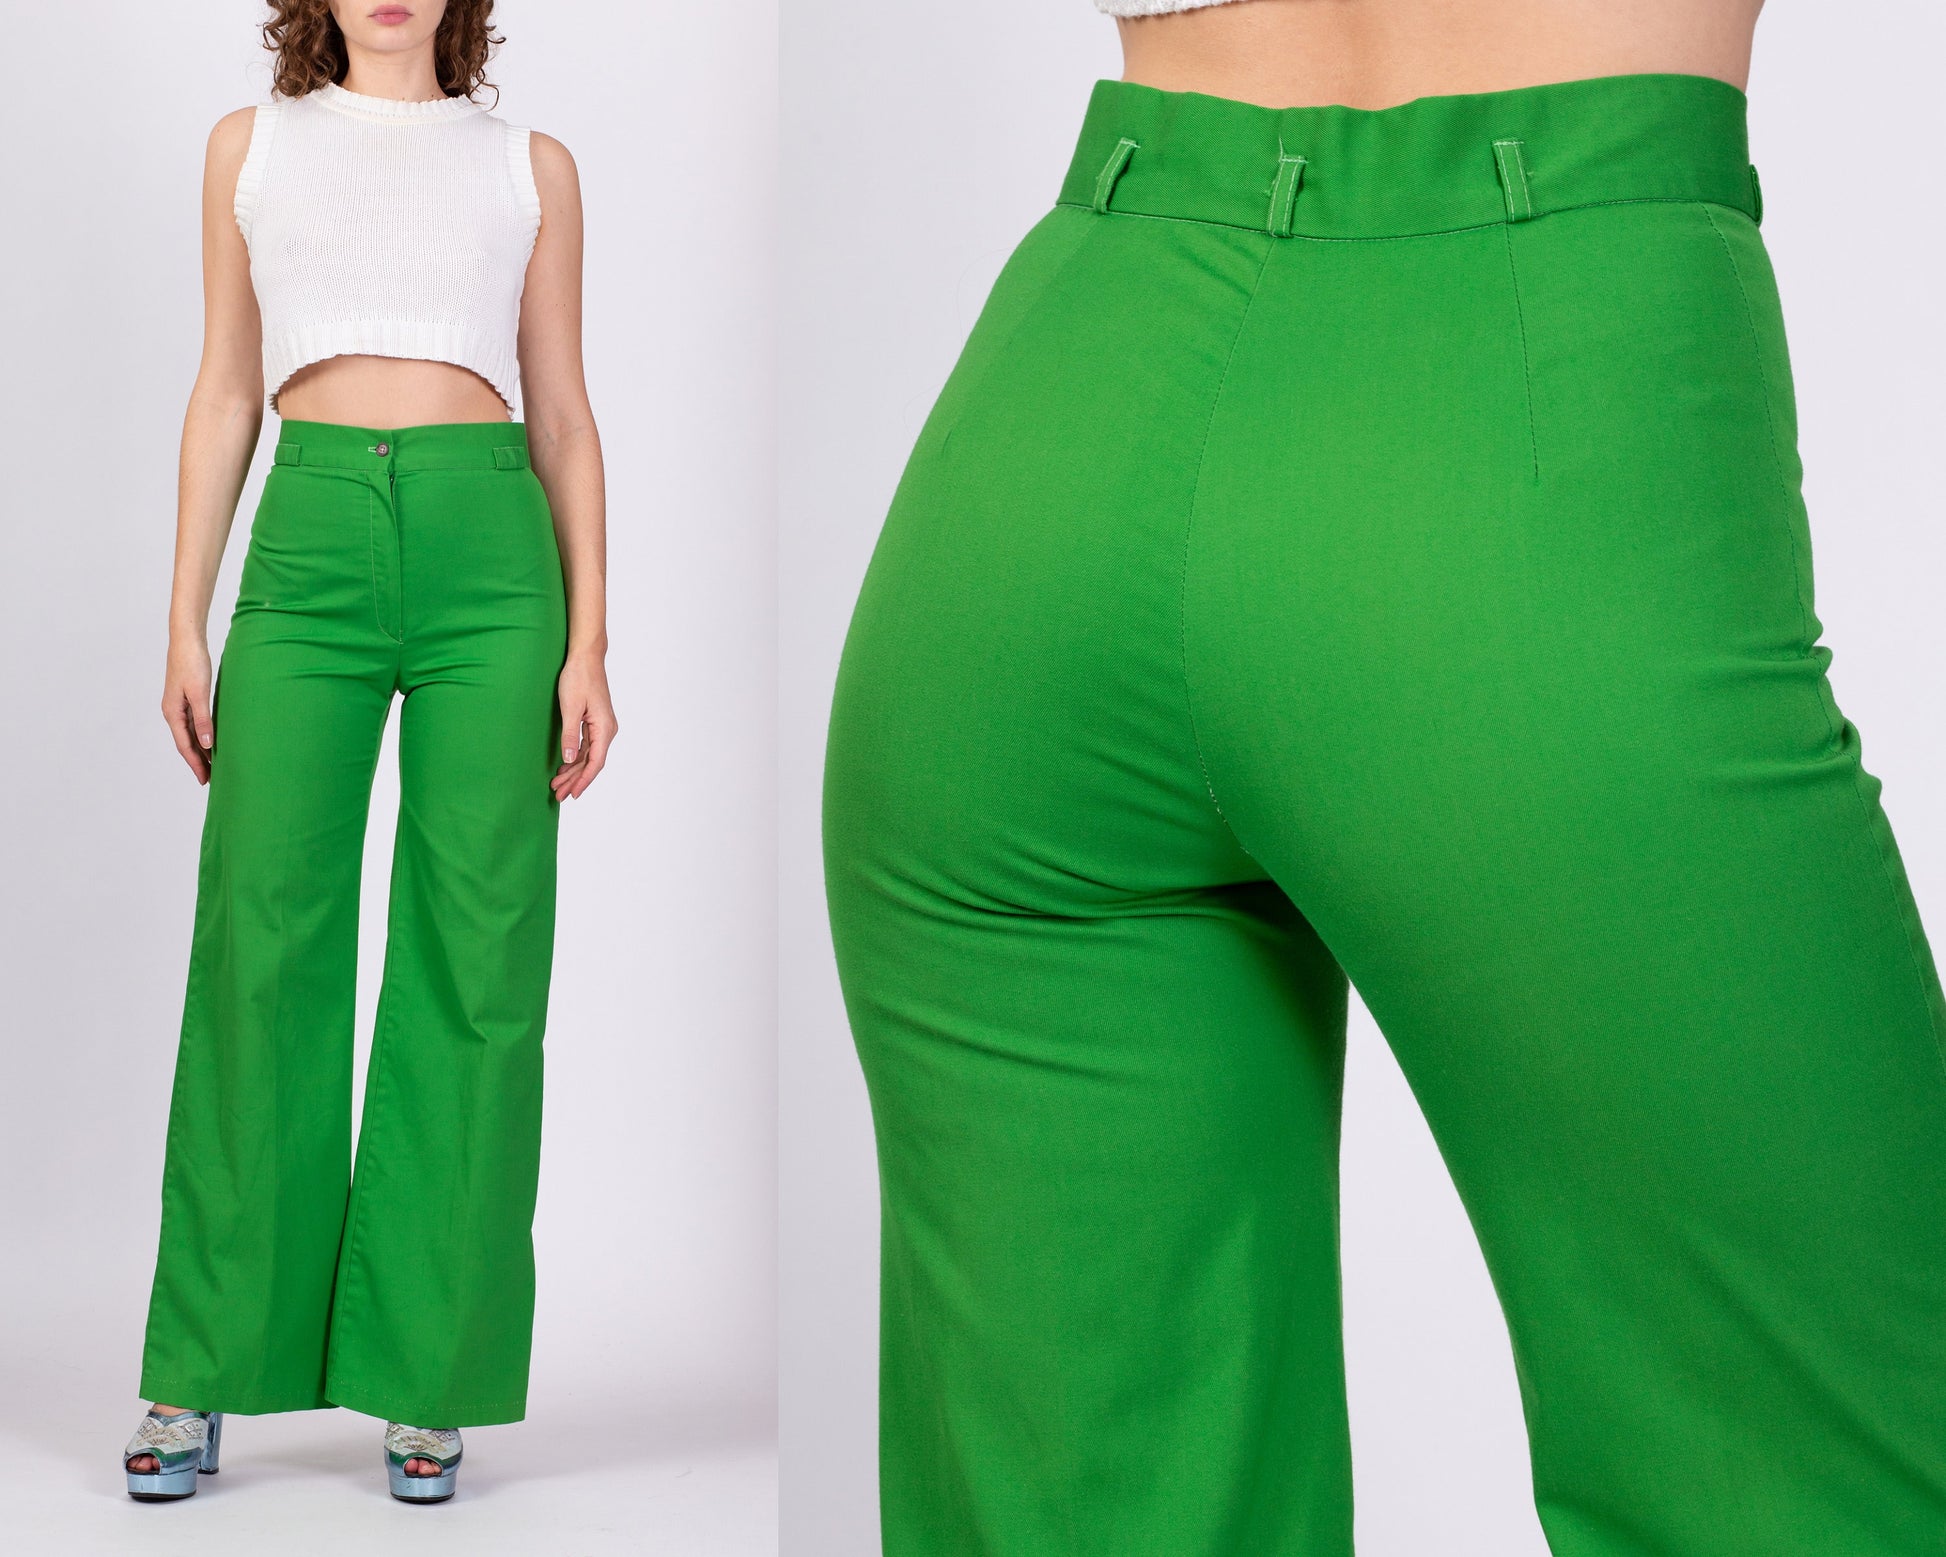 70s Green High Waisted Pants - Small to Medium – Flying Apple Vintage